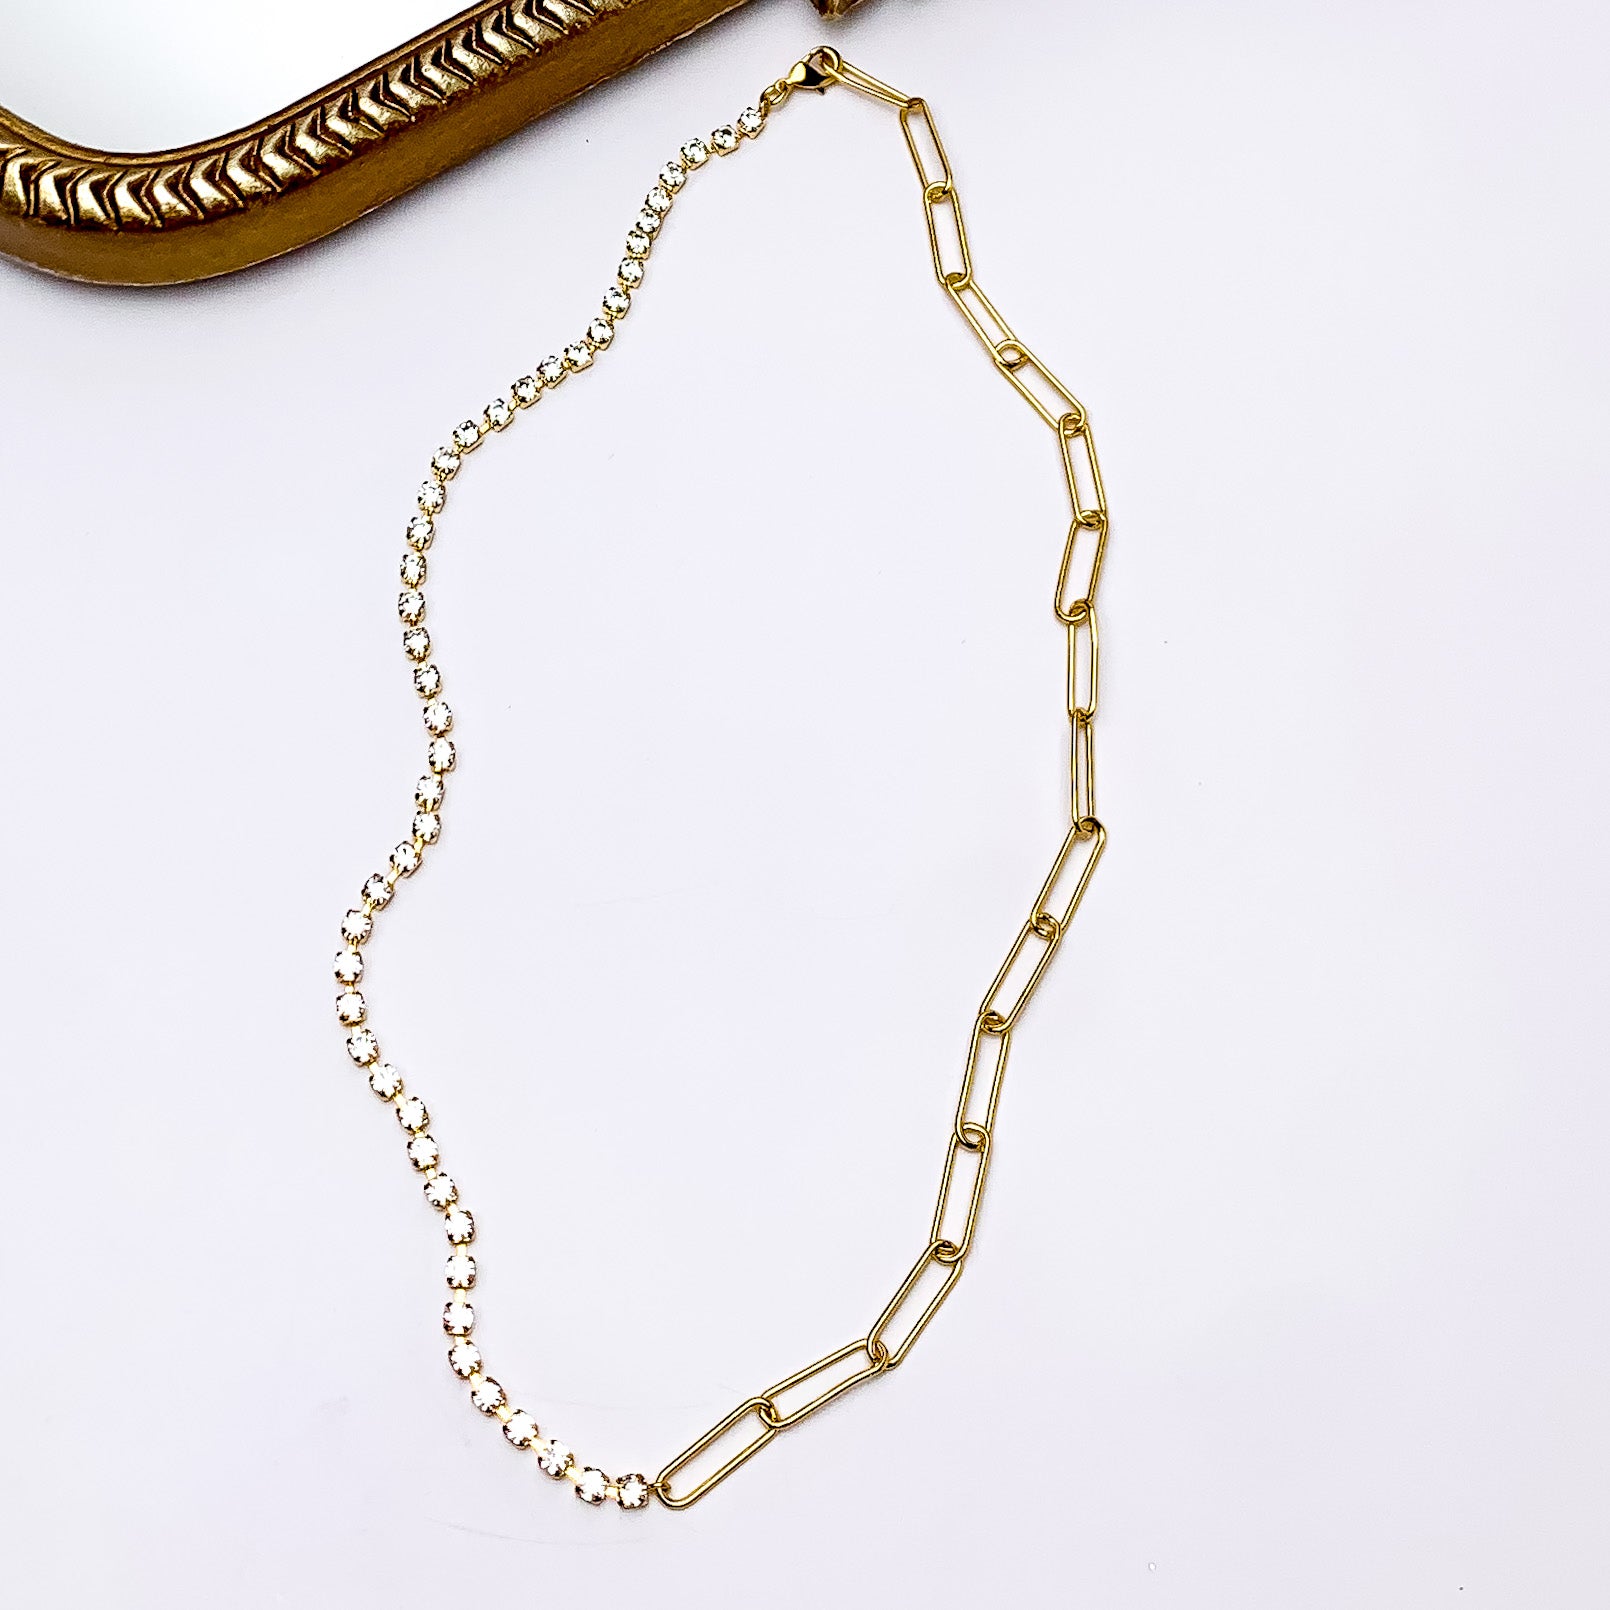 Gold Dipped Necklace Split With Clear Crystals and Chain - Giddy Up Glamour Boutique